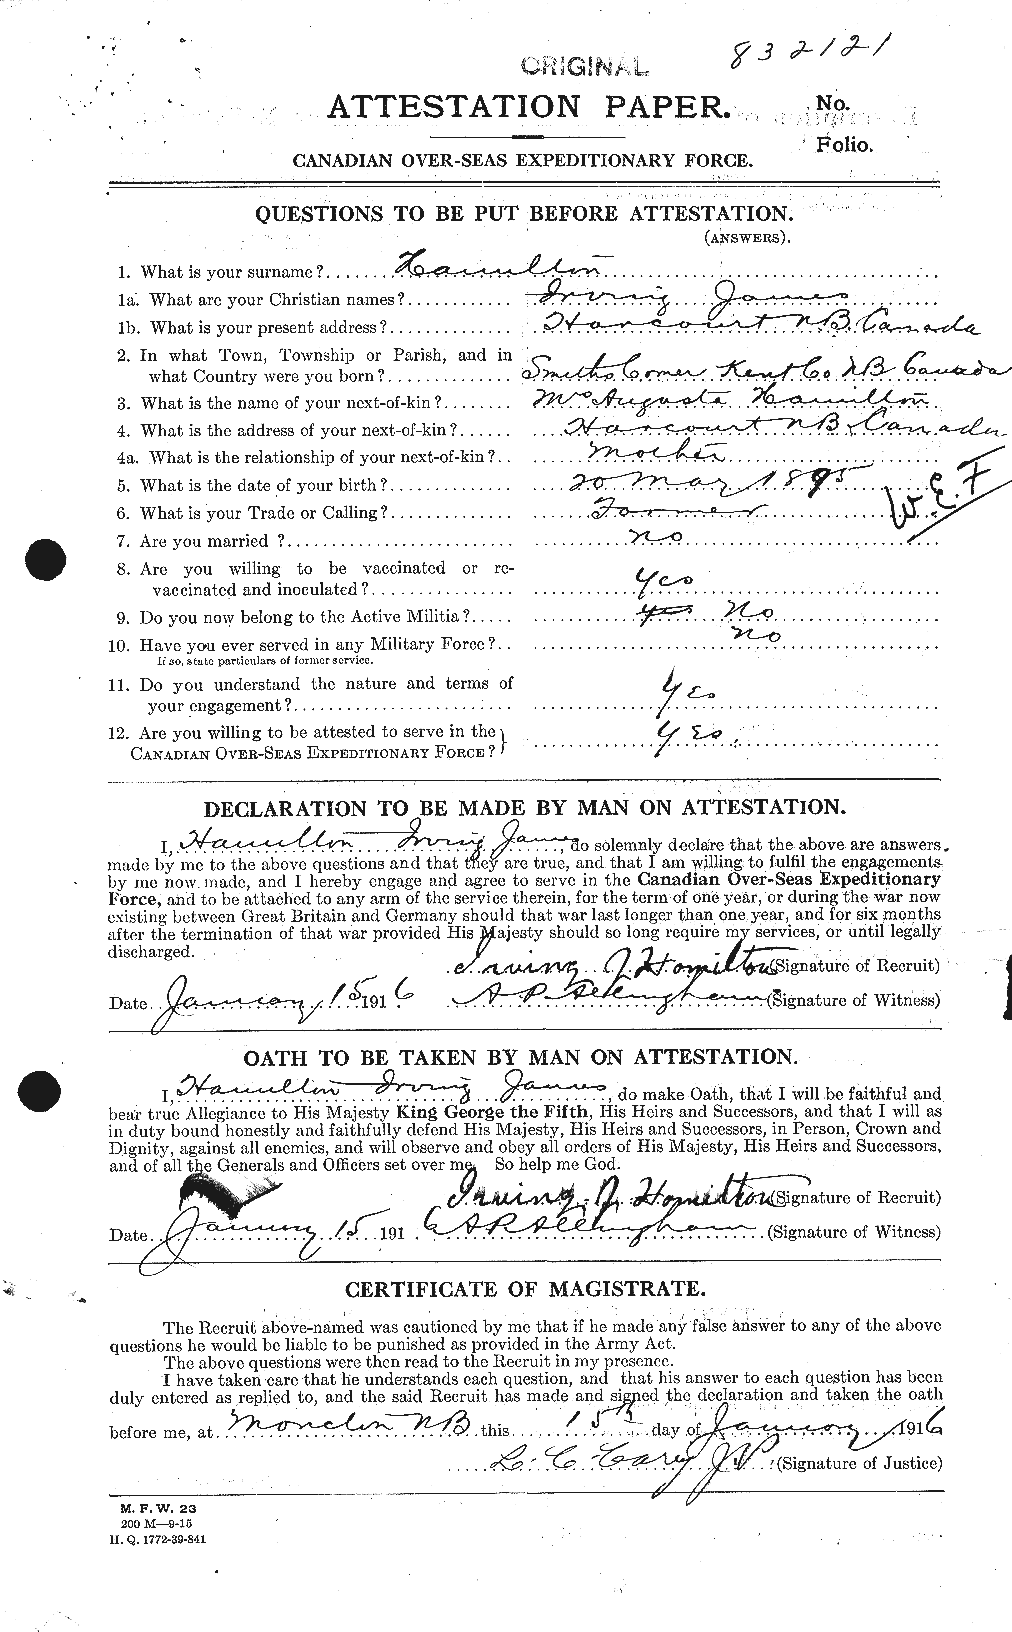 Personnel Records of the First World War - CEF 372926a